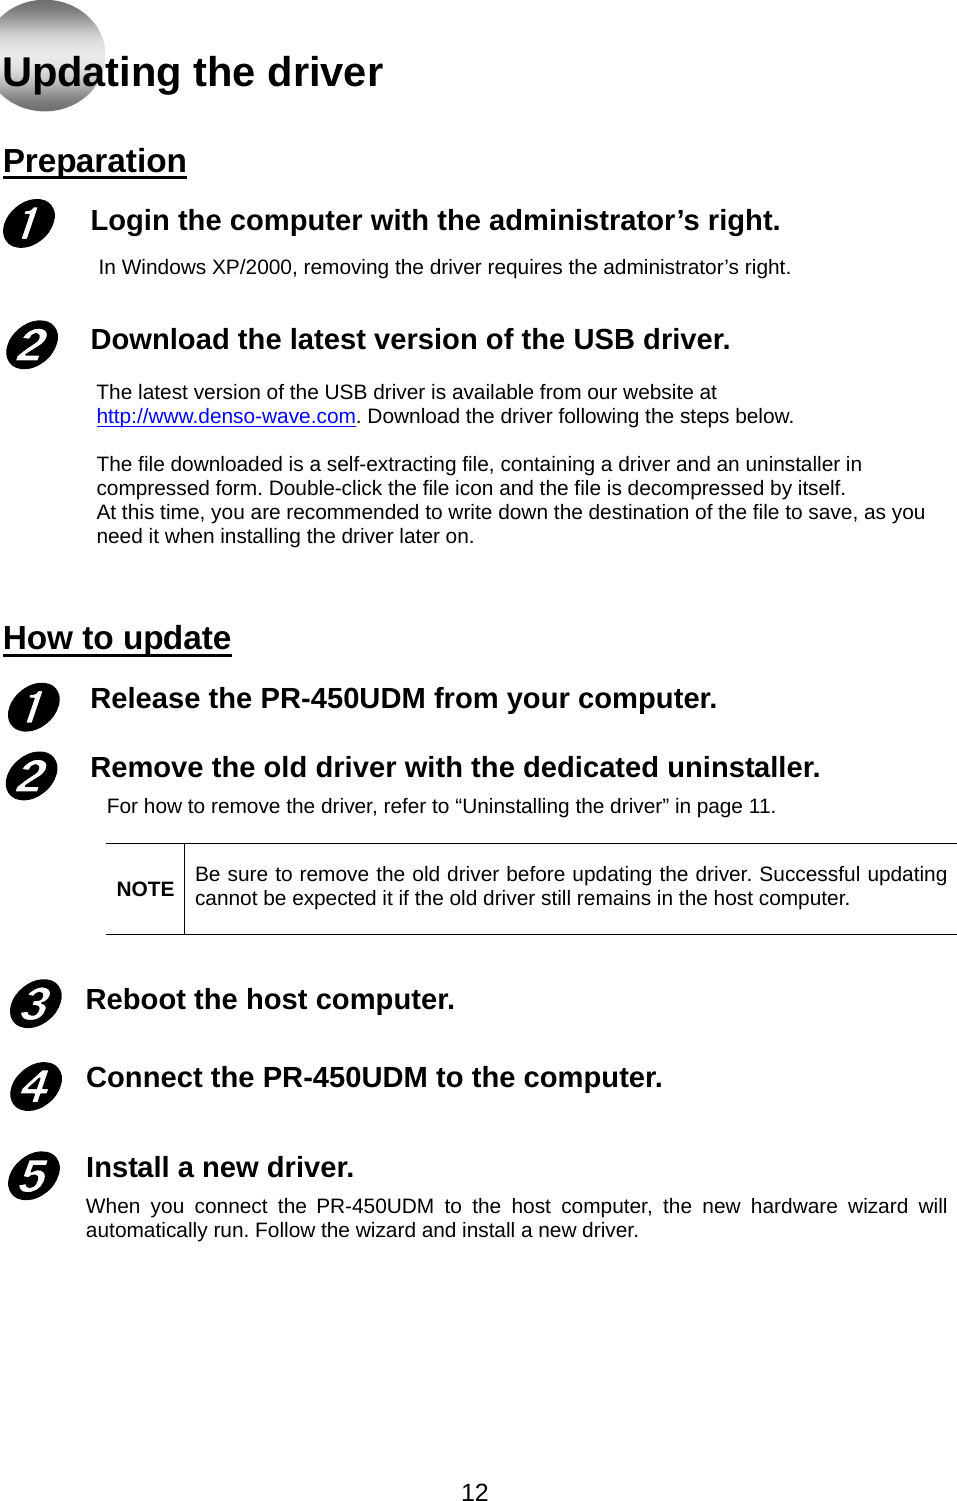   Updating the driver   Preparation  Login the computer with the administrator’s right. In Windows XP/2000, removing the driver requires the administrator’s right.   Download the latest version of the USB driver.  ➊ ➋ The latest version of the USB driver is available from our website at http://www.denso-wave.com. Download the driver following the steps below.  The file downloaded is a self-extracting file, containing a driver and an uninstaller in compressed form. Double-click the file icon and the file is decompressed by itself. At this time, you are recommended to write down the destination of the file to save, as you need it when installing the driver later on.  How to update Release the PR-450UDM from your computer.  Remove the old driver with the dedicated uninstaller. ➊ ➋ For how to remove the driver, refer to “Uninstalling the driver” in page 11.  NOTE  Be sure to remove the old driver before updating the driver. Successful updating cannot be expected it if the old driver still remains in the host computer.   Reboot the host computer. ➌  Connect the PR-450UDM to the computer.  ➍ Install a new driver. When you connect the PR-450UDM to the host computer, the new hardware wizard will automatically run. Follow the wizard and install a new driver.   ➎     12